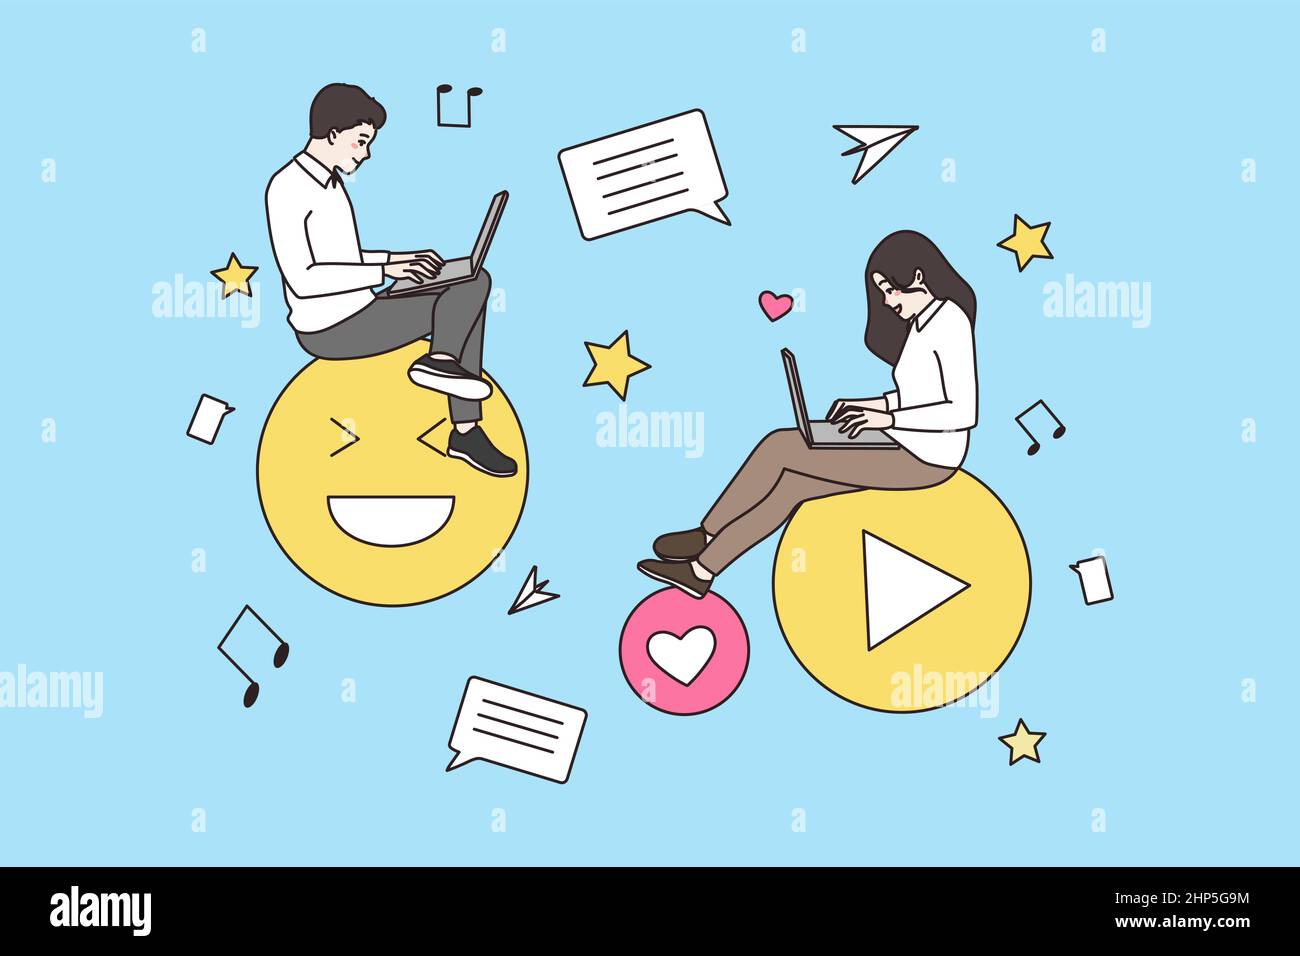 People use laptops communicate online on social media Stock Vector